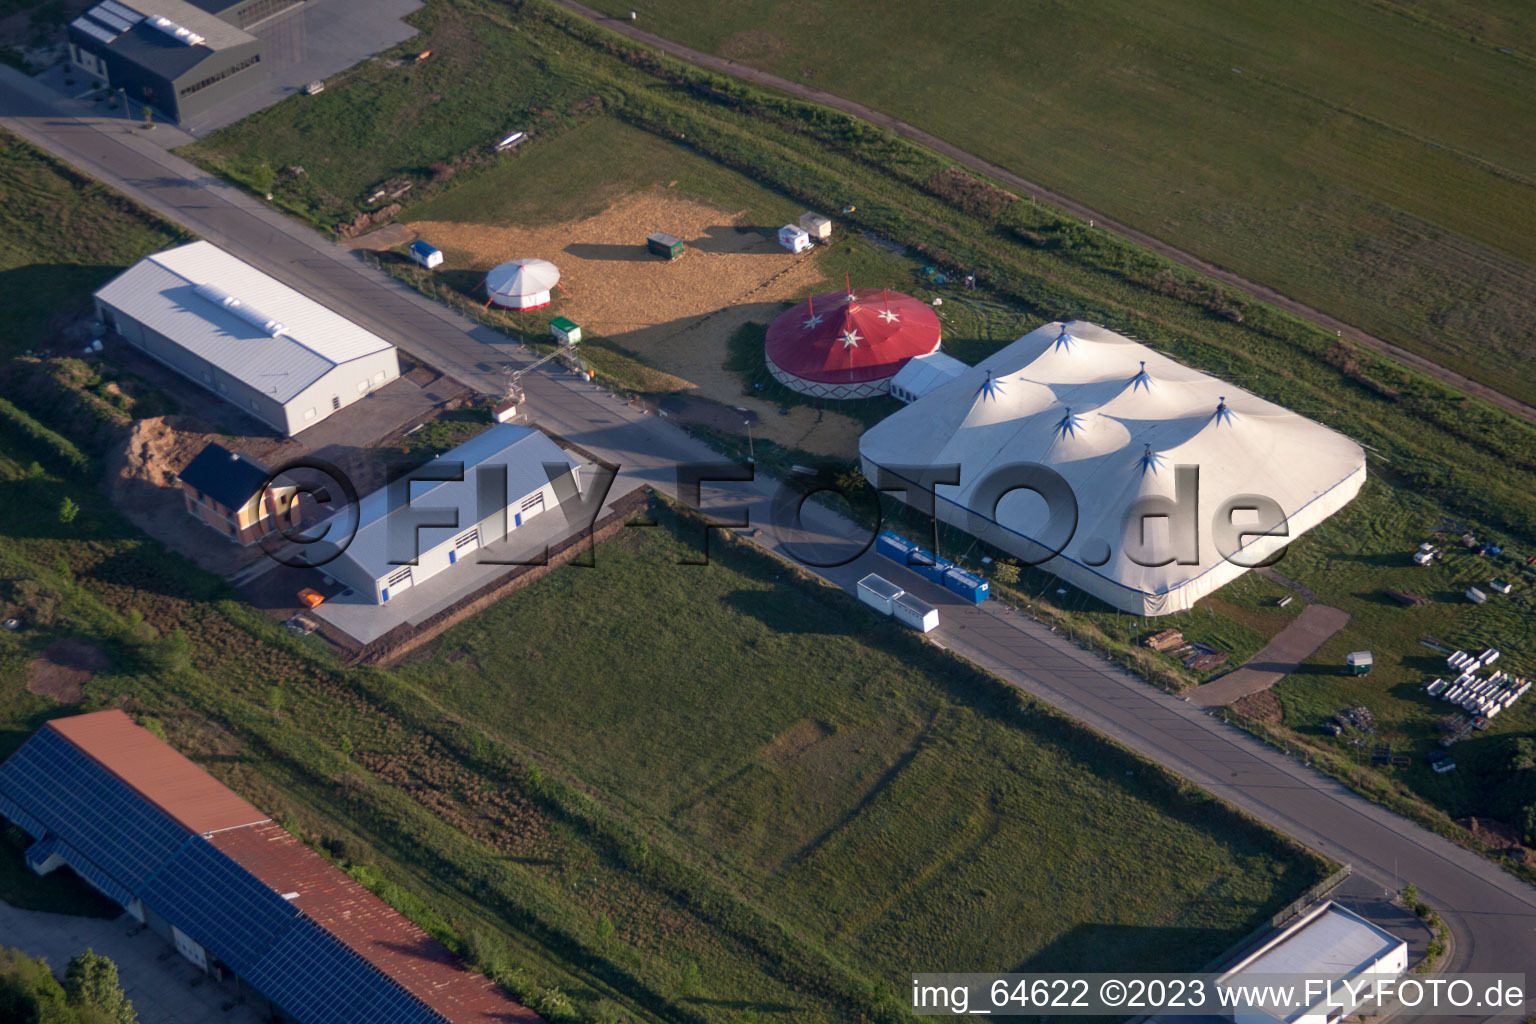 Aerial view of Circus tent in the district Speyerdorf in Neustadt an der Weinstraße in the state Rhineland-Palatinate, Germany